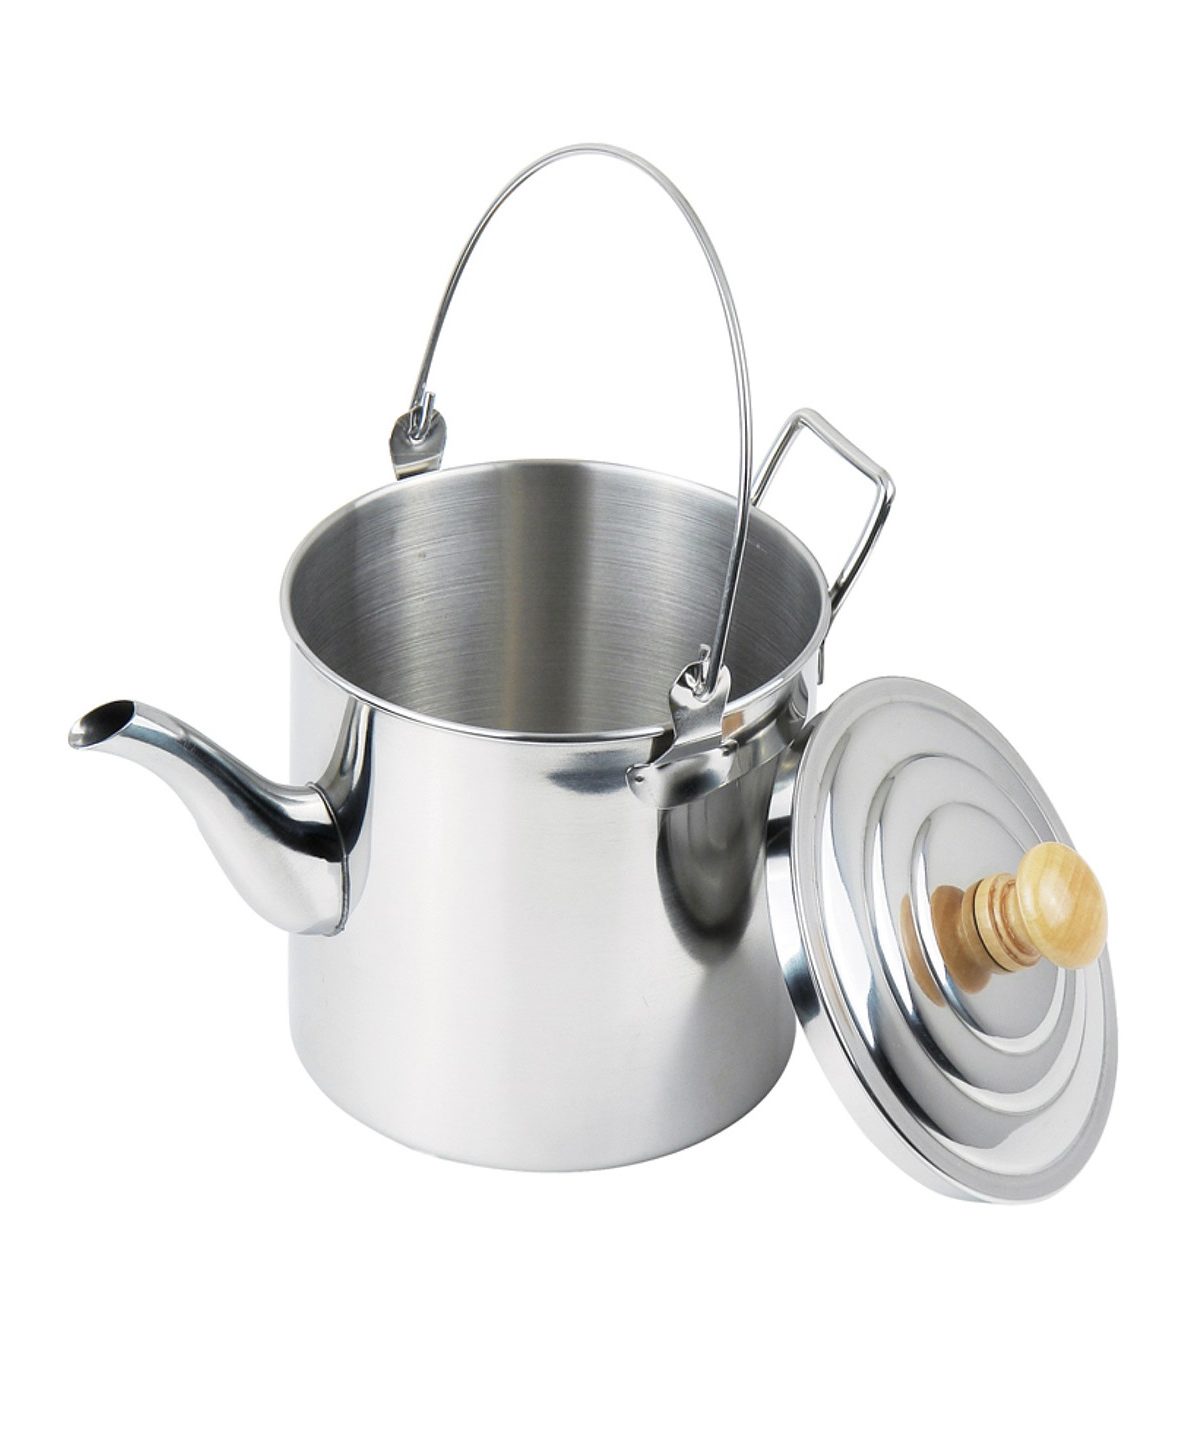 Chinook Stainless Steel Kettle - Weaver and Devore Trading Ltd